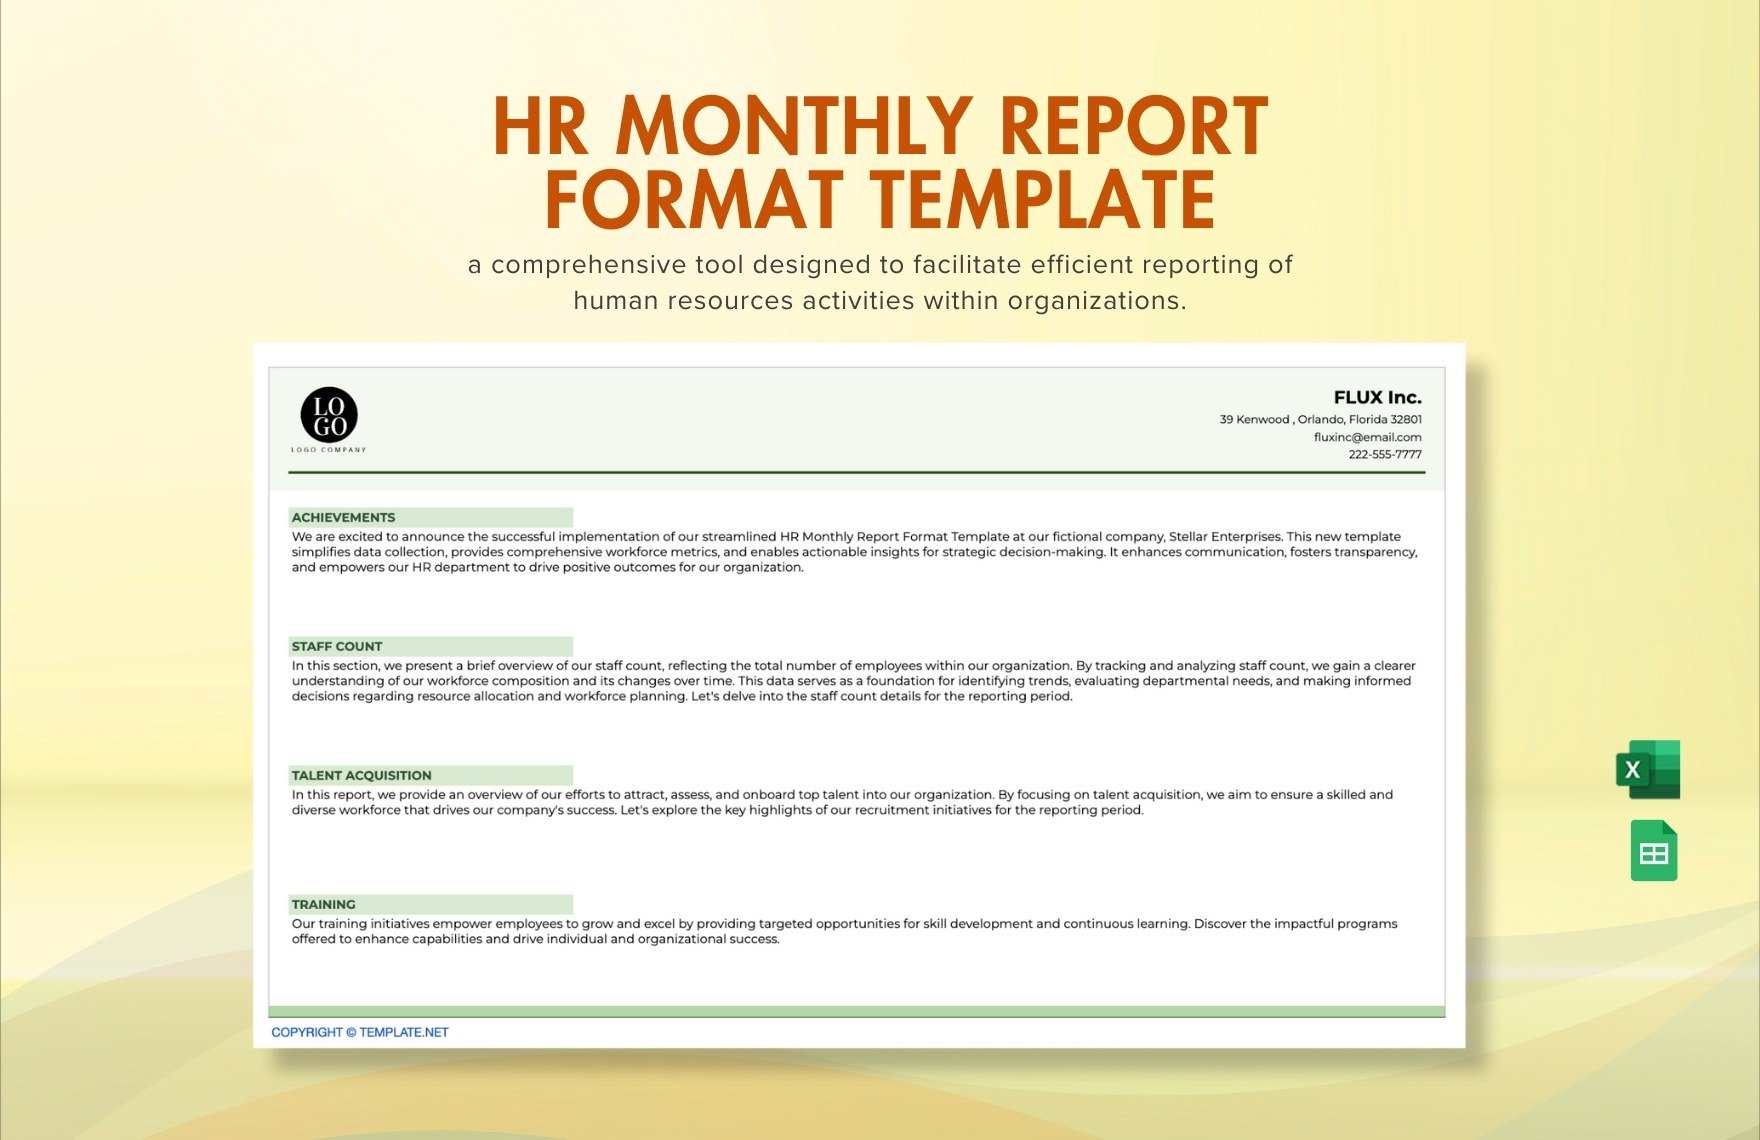 HR Monthly Report Format Template in Excel, Google Sheets